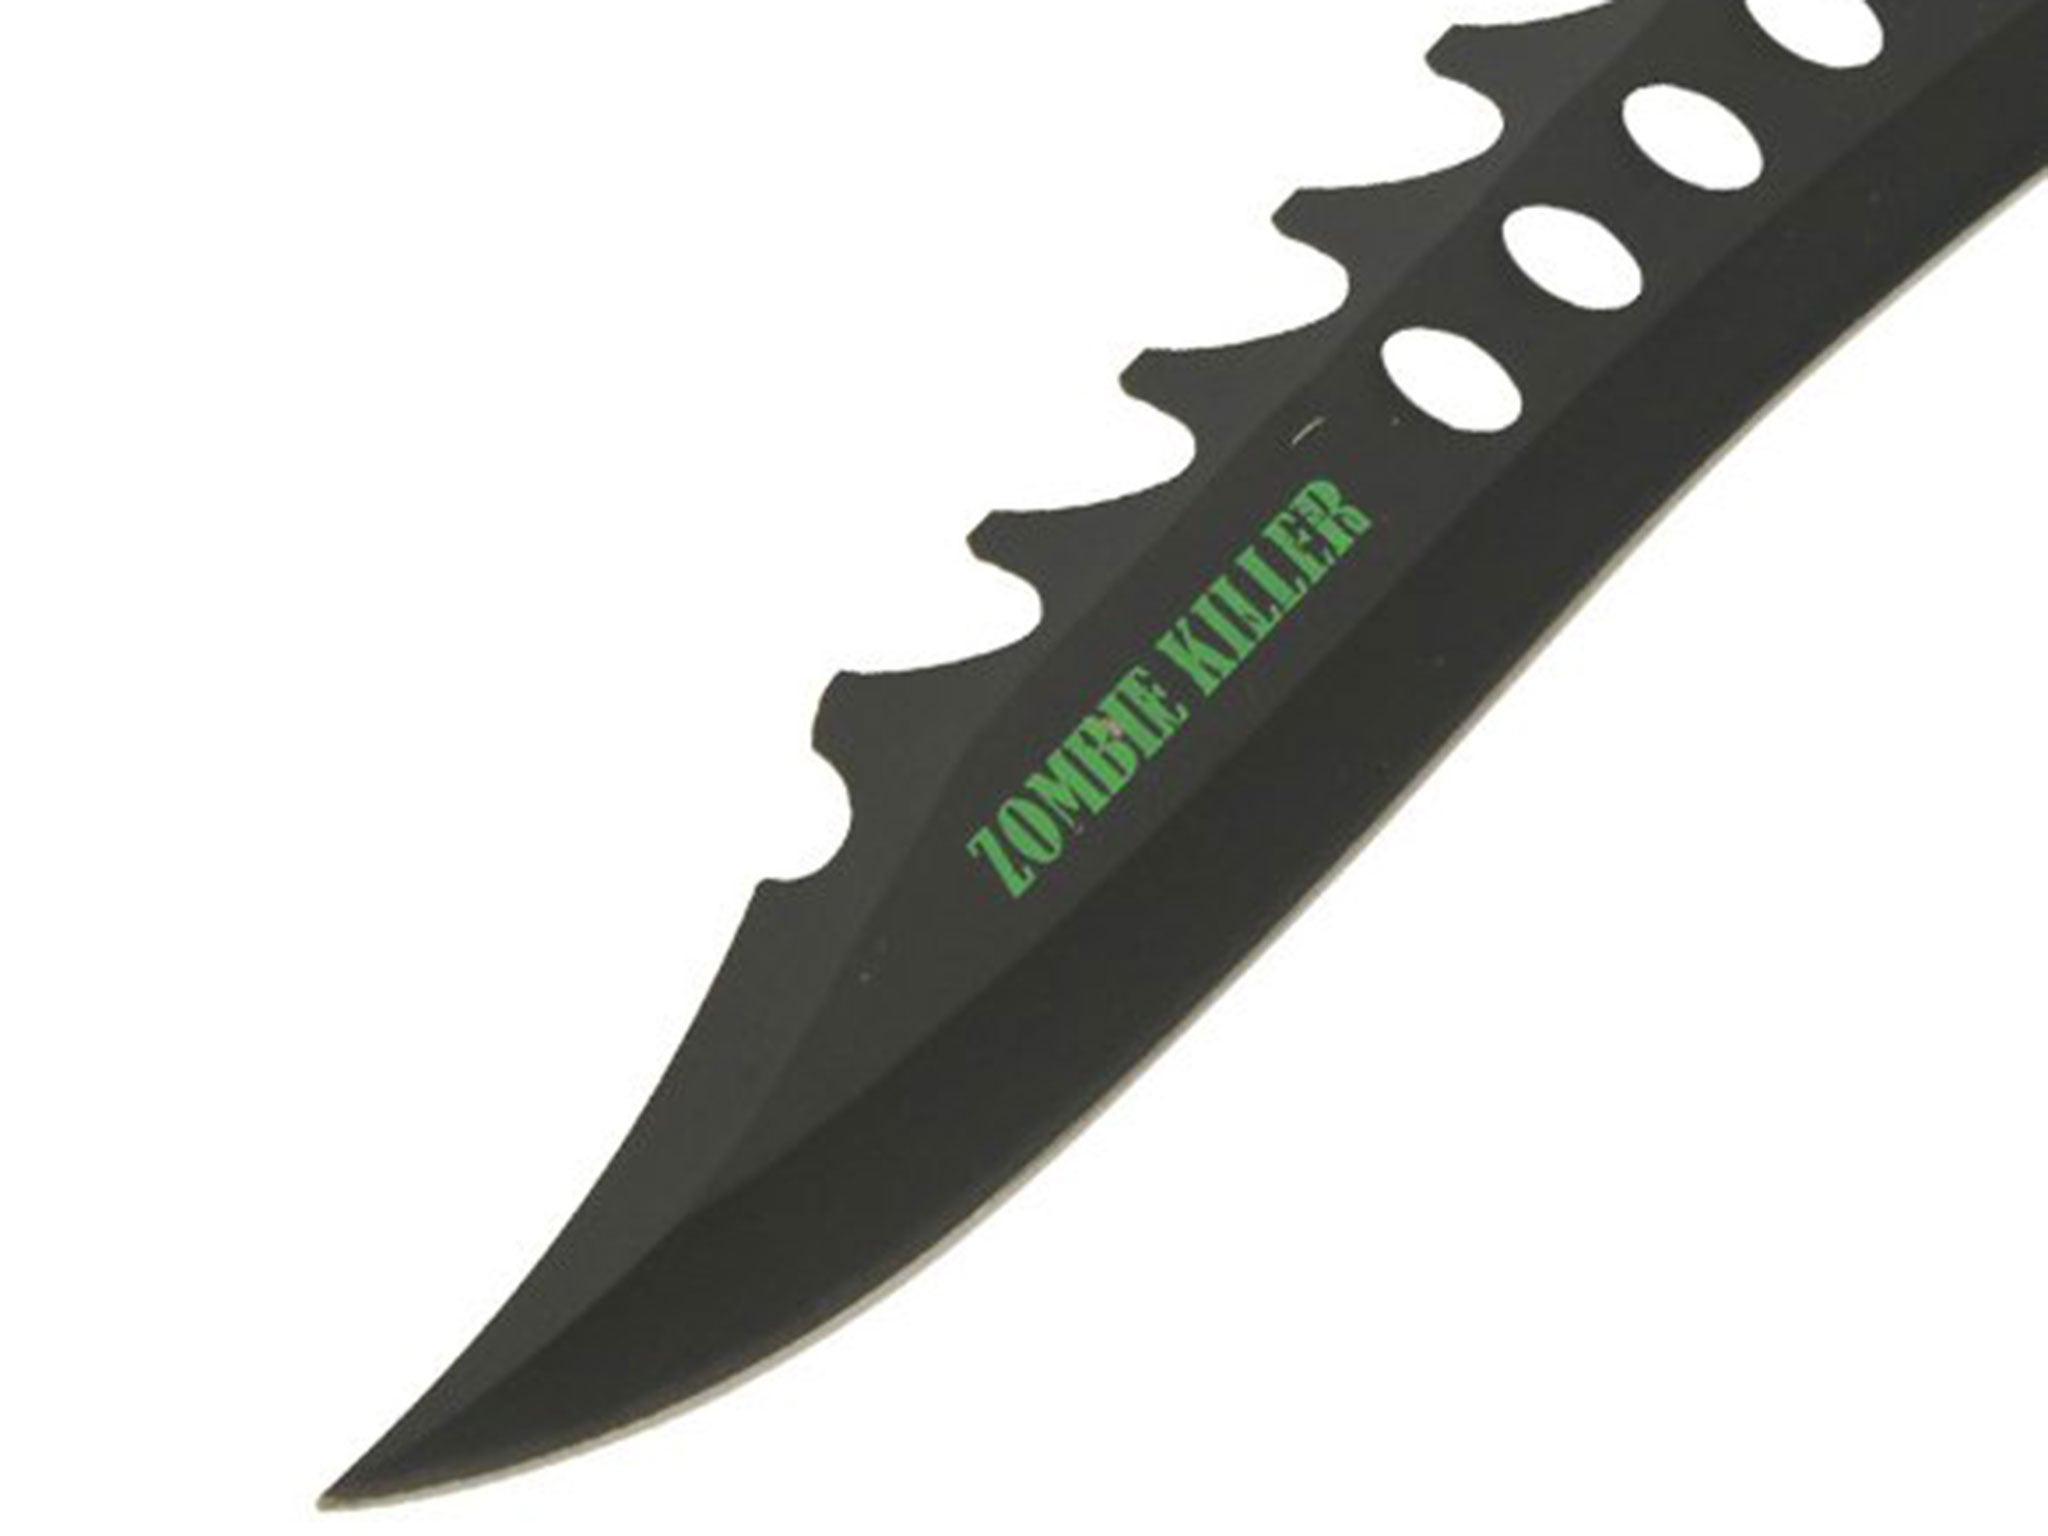 Sale of lethal 'zombie killer' knives to be banned in the ...